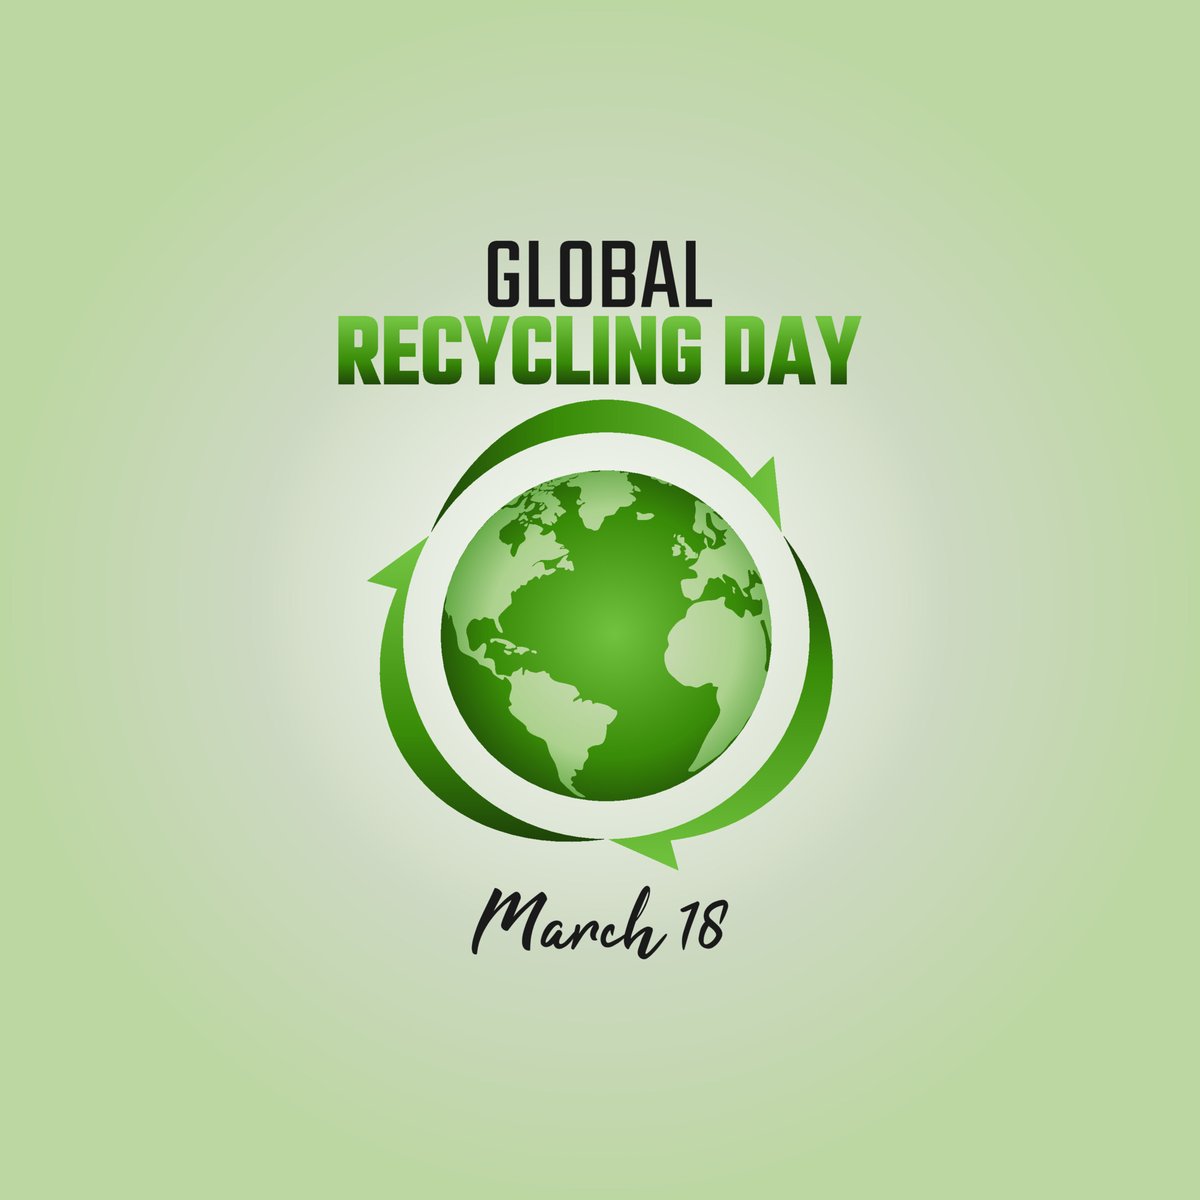 Happy Global Recycling Day! ♻️🌍 Wales is recognised as one of the world's leading recyclers, and sustainability is at the heart of the Food and Drink industry in Wales. #FoodDrinkWales #GlobalRecyclingDay